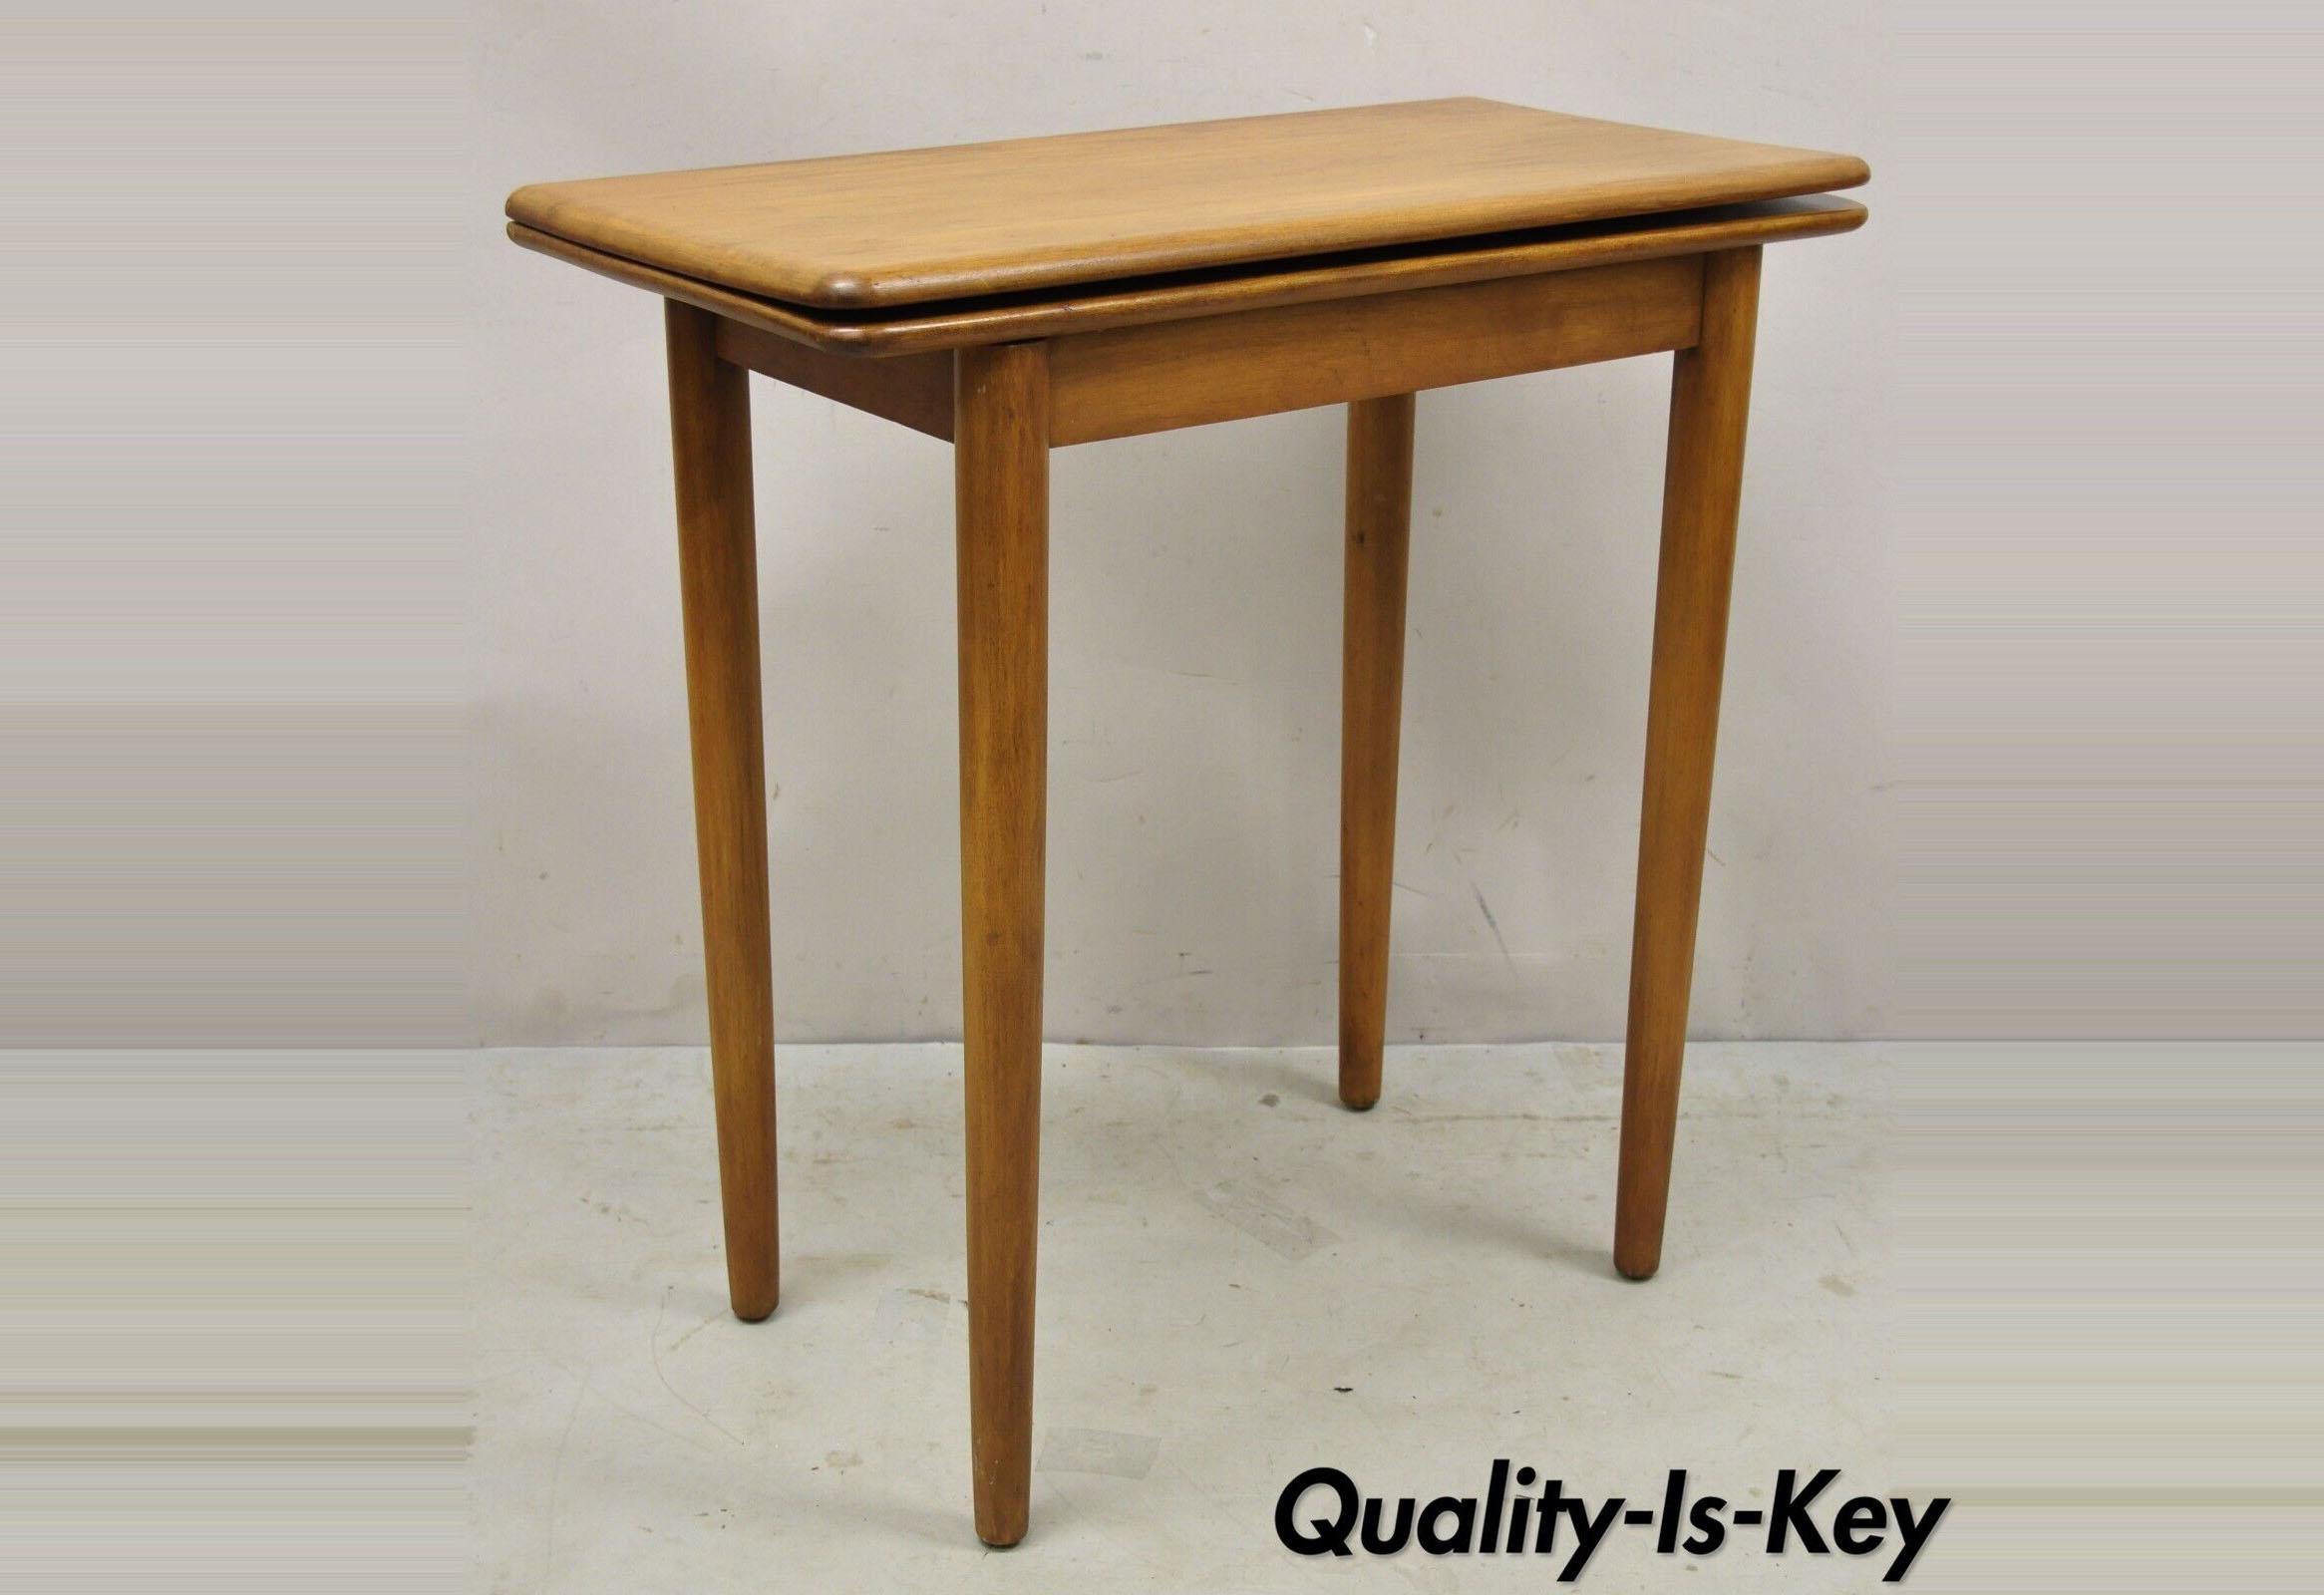 Vintage mid-century maple wood expanding folding game table. Item features removable tapered legs, flip and spin expanding top, beautiful wood grain, very nice vintage item, great style and form. Circa mid-20th century. Measurements: 30.5